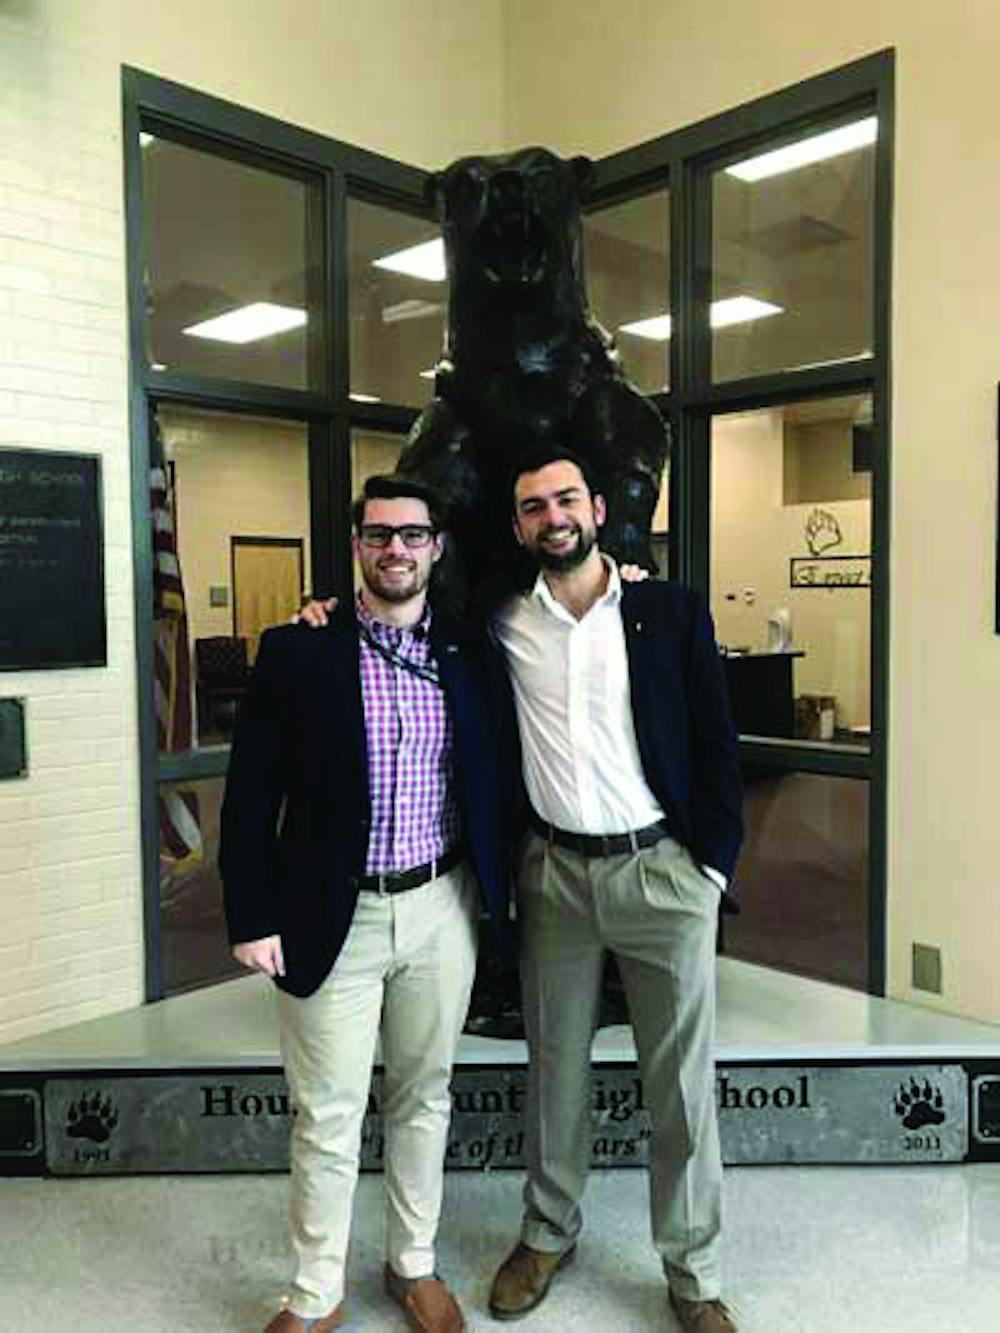 Brandon Hancock and Jonathan Kenton, founders of Newt Technologies, posing in front of bear statue at Houston County High School. Photo provided by Hancock and Kenton.
